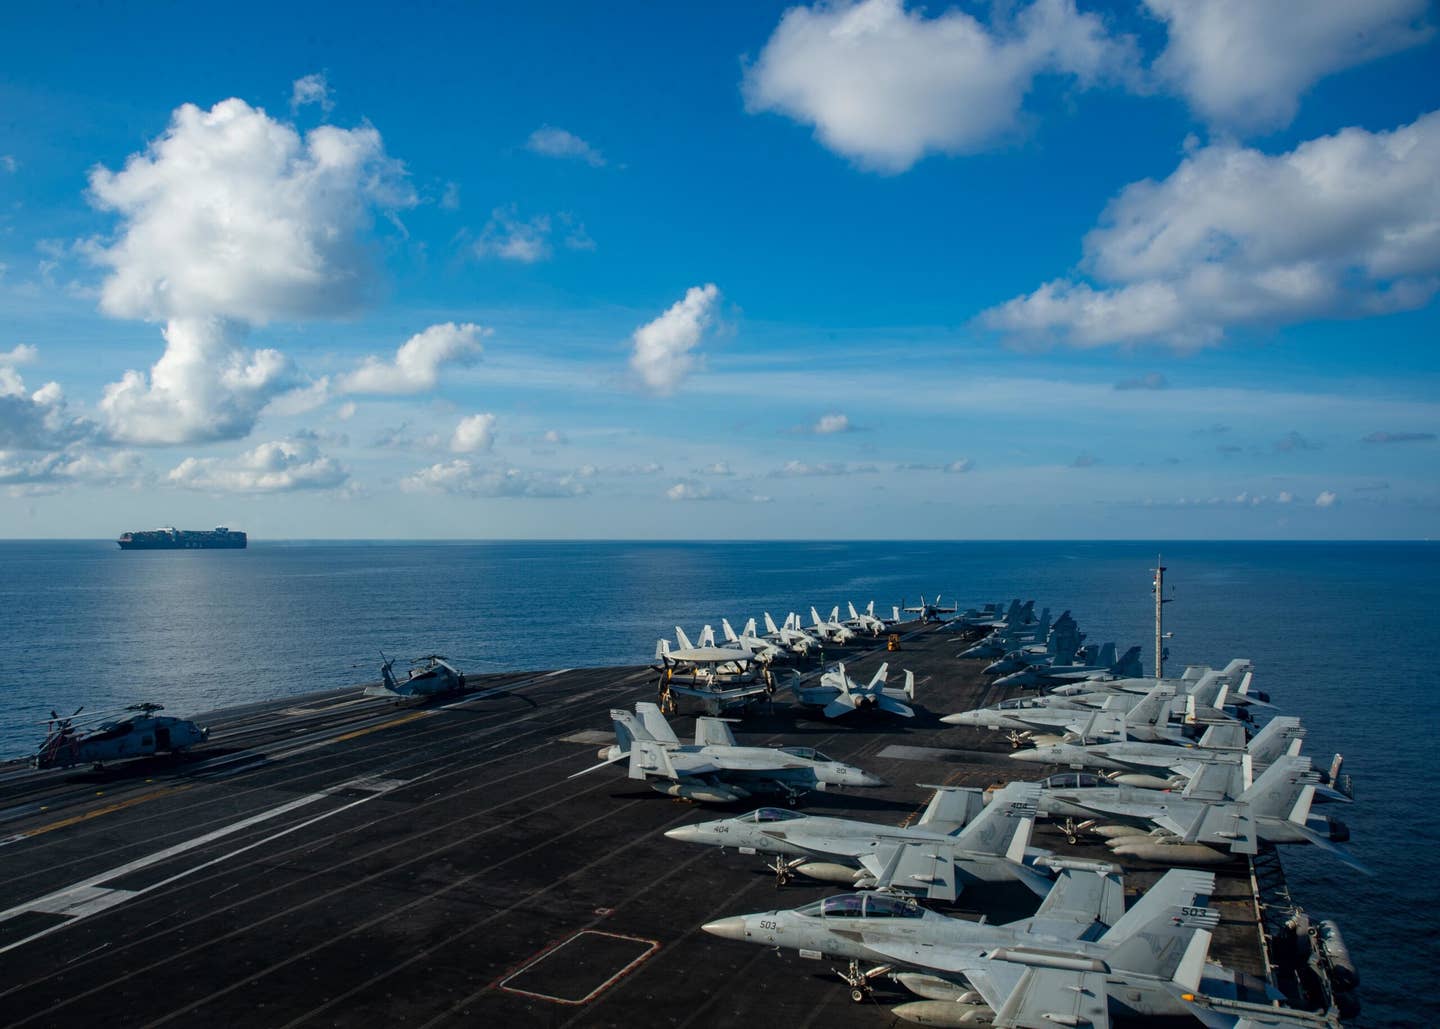 The U.S. Navy’s only forward-deployed aircraft carrier, USS <em>Ronald Reagan</em>, steams through international waters in the South China Sea in September 2021. <em>U.S. Navy photo by Mass Communication Specialist 3rd Class Askia Collins</em>